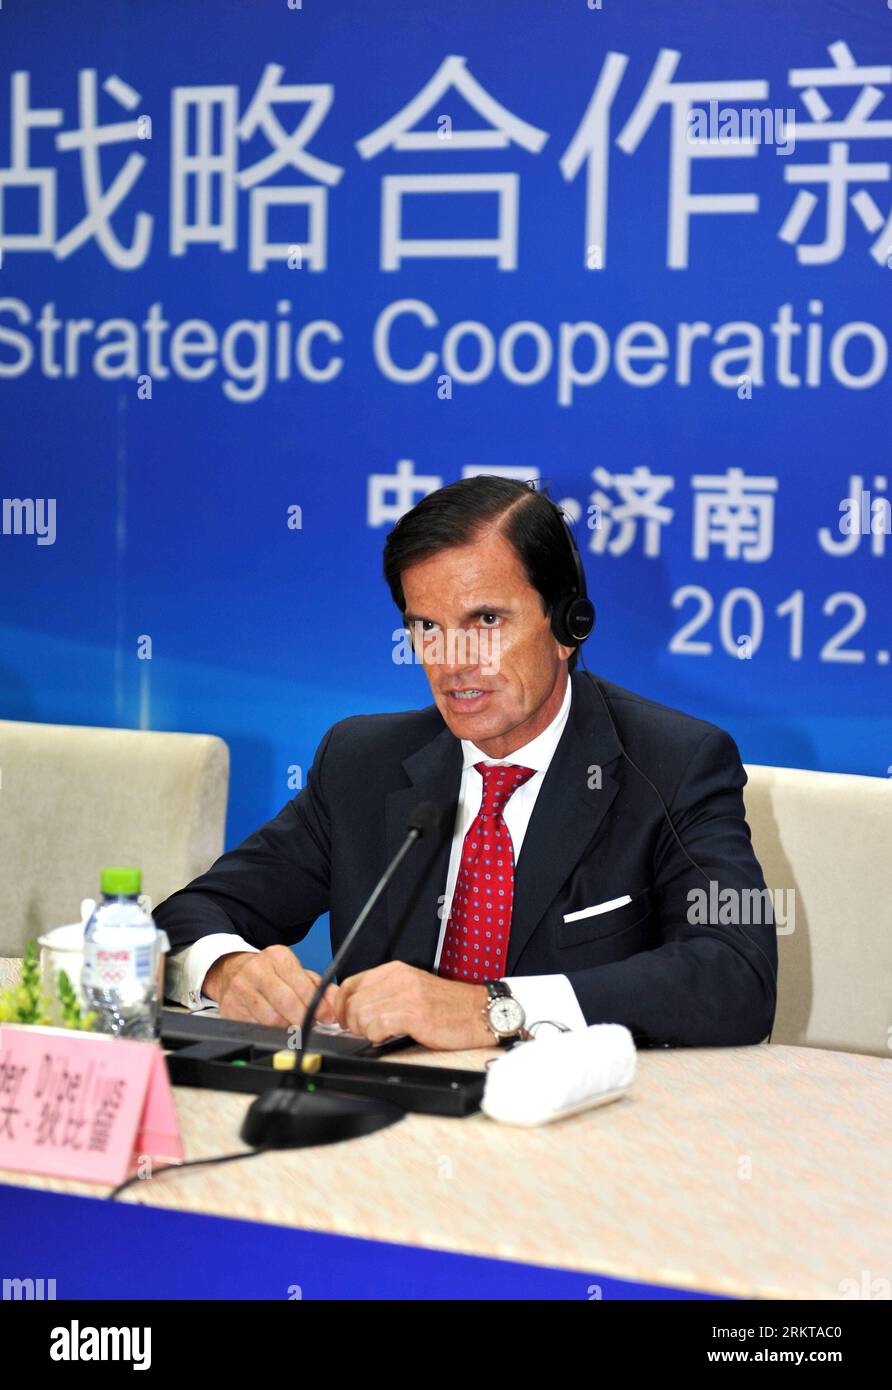 Bildnummer: 58421987  Datum: 03.09.2012  Copyright: imago/Xinhua (120903) -- JINAN, Sept. 3, 2012 (Xinhua) -- Alexander Dibelius, head of Goldman Sachs Germany, Austria and Central and Eastern Europe, attends a press conference in Jinan, capital of east China s Shandong Province, Sept. 3, 2012. Weichai Power, an automotive and equipment manufacturing firm under Shandong Heavy Industry (SHIG) on Monday clinched a deal to buy a one-quarter stake in German forklift truck maker Kion Group. The 738 million-euro (922 million U.S. dollars) deal was signed in Jinan and it marked the greatest direct in Stock Photo